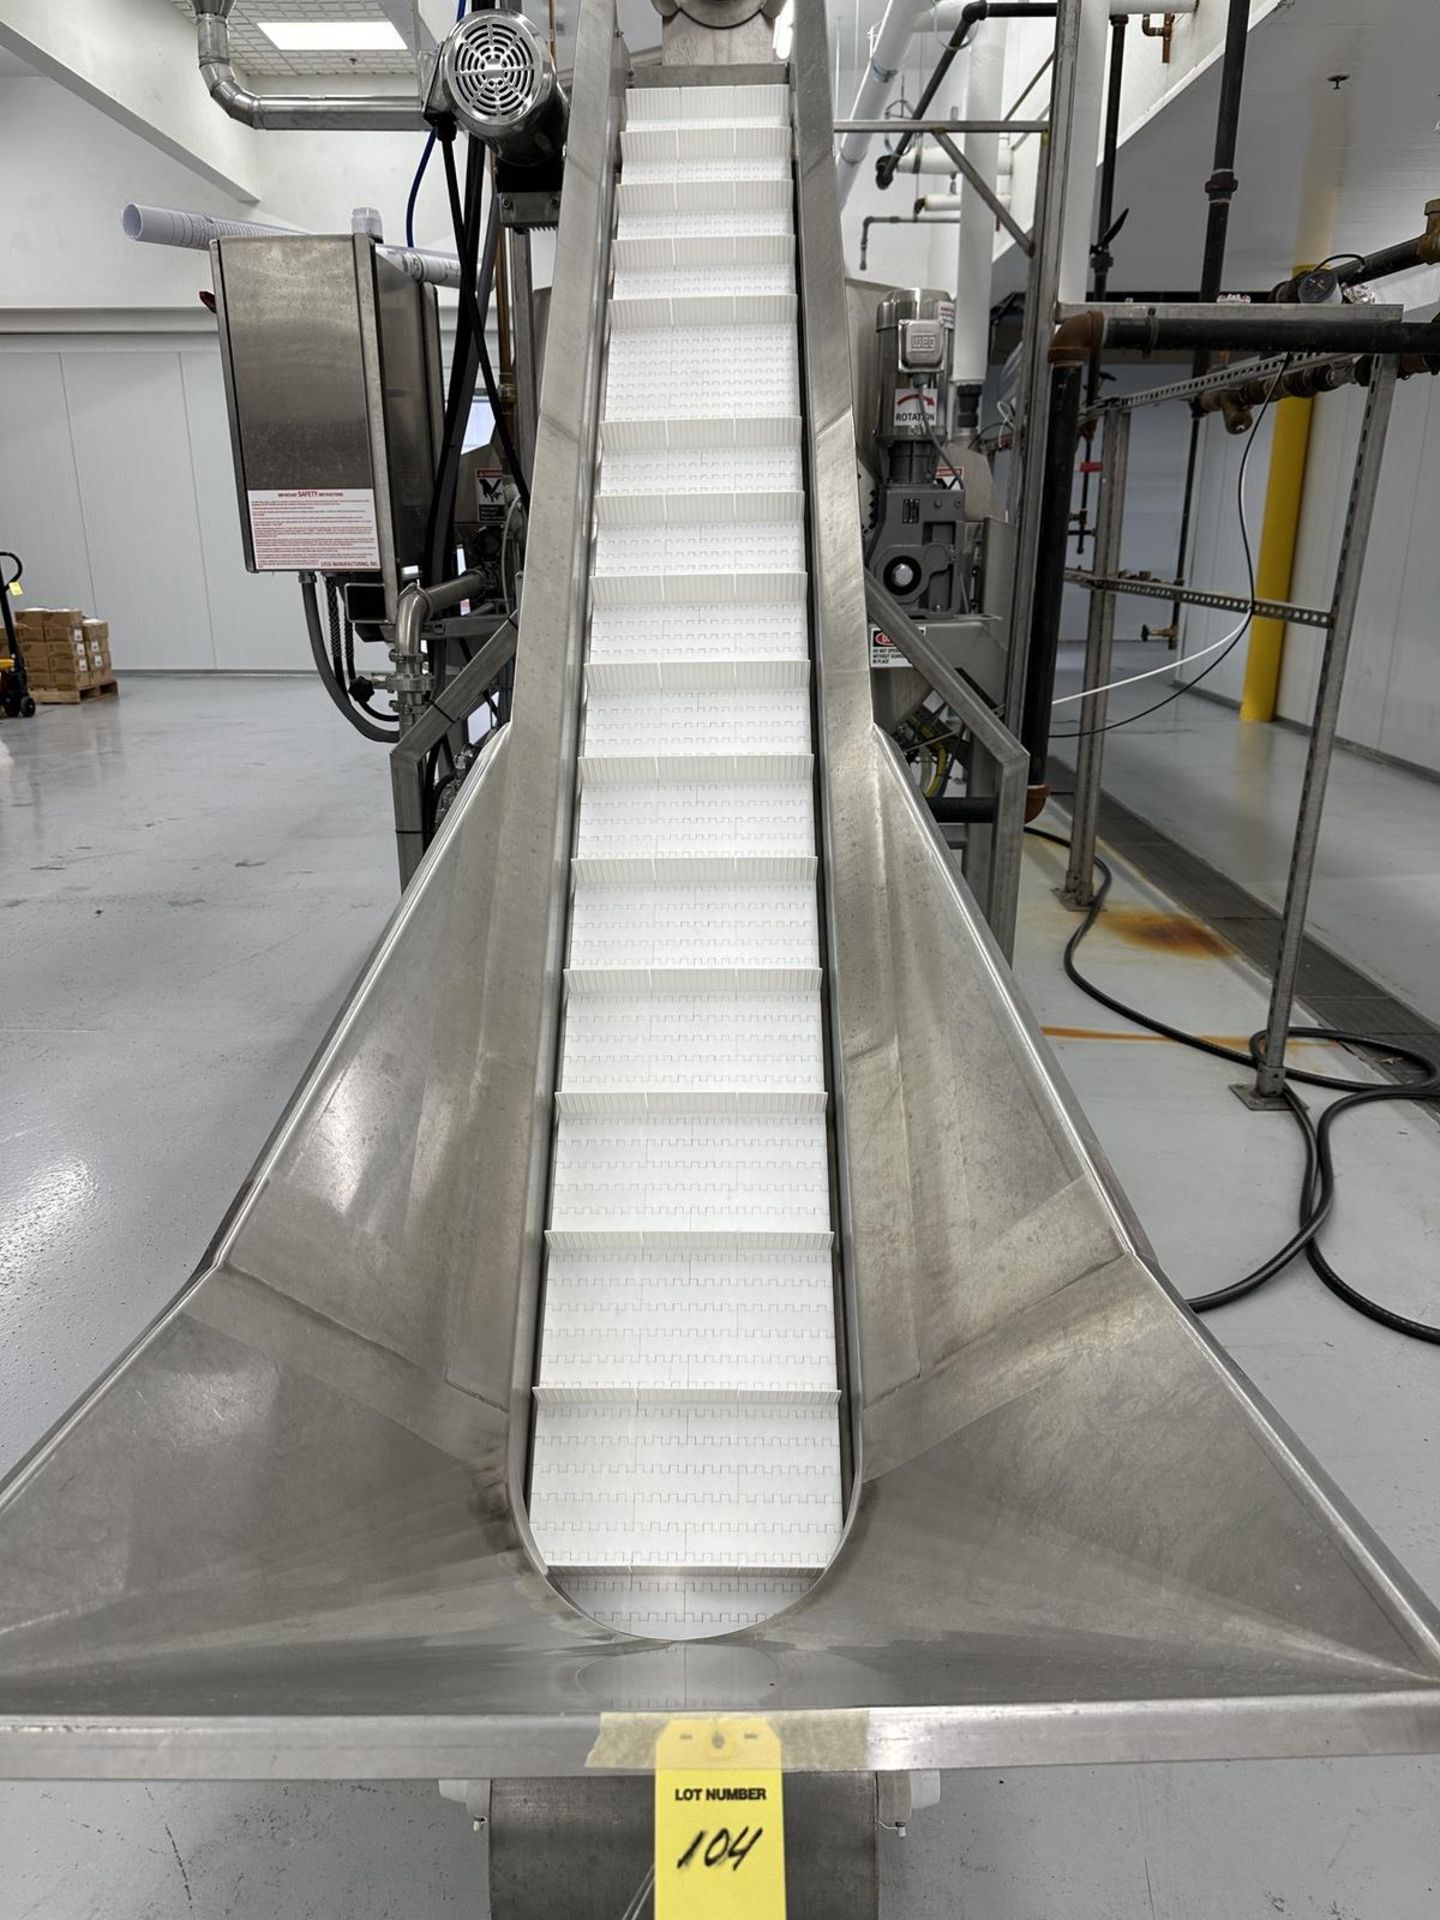 2022 Stainless Steel Incline Conveyor, Approx. 8' H x 12" Cleated Poly Conveyor | Rig Fee $350 - Image 3 of 4